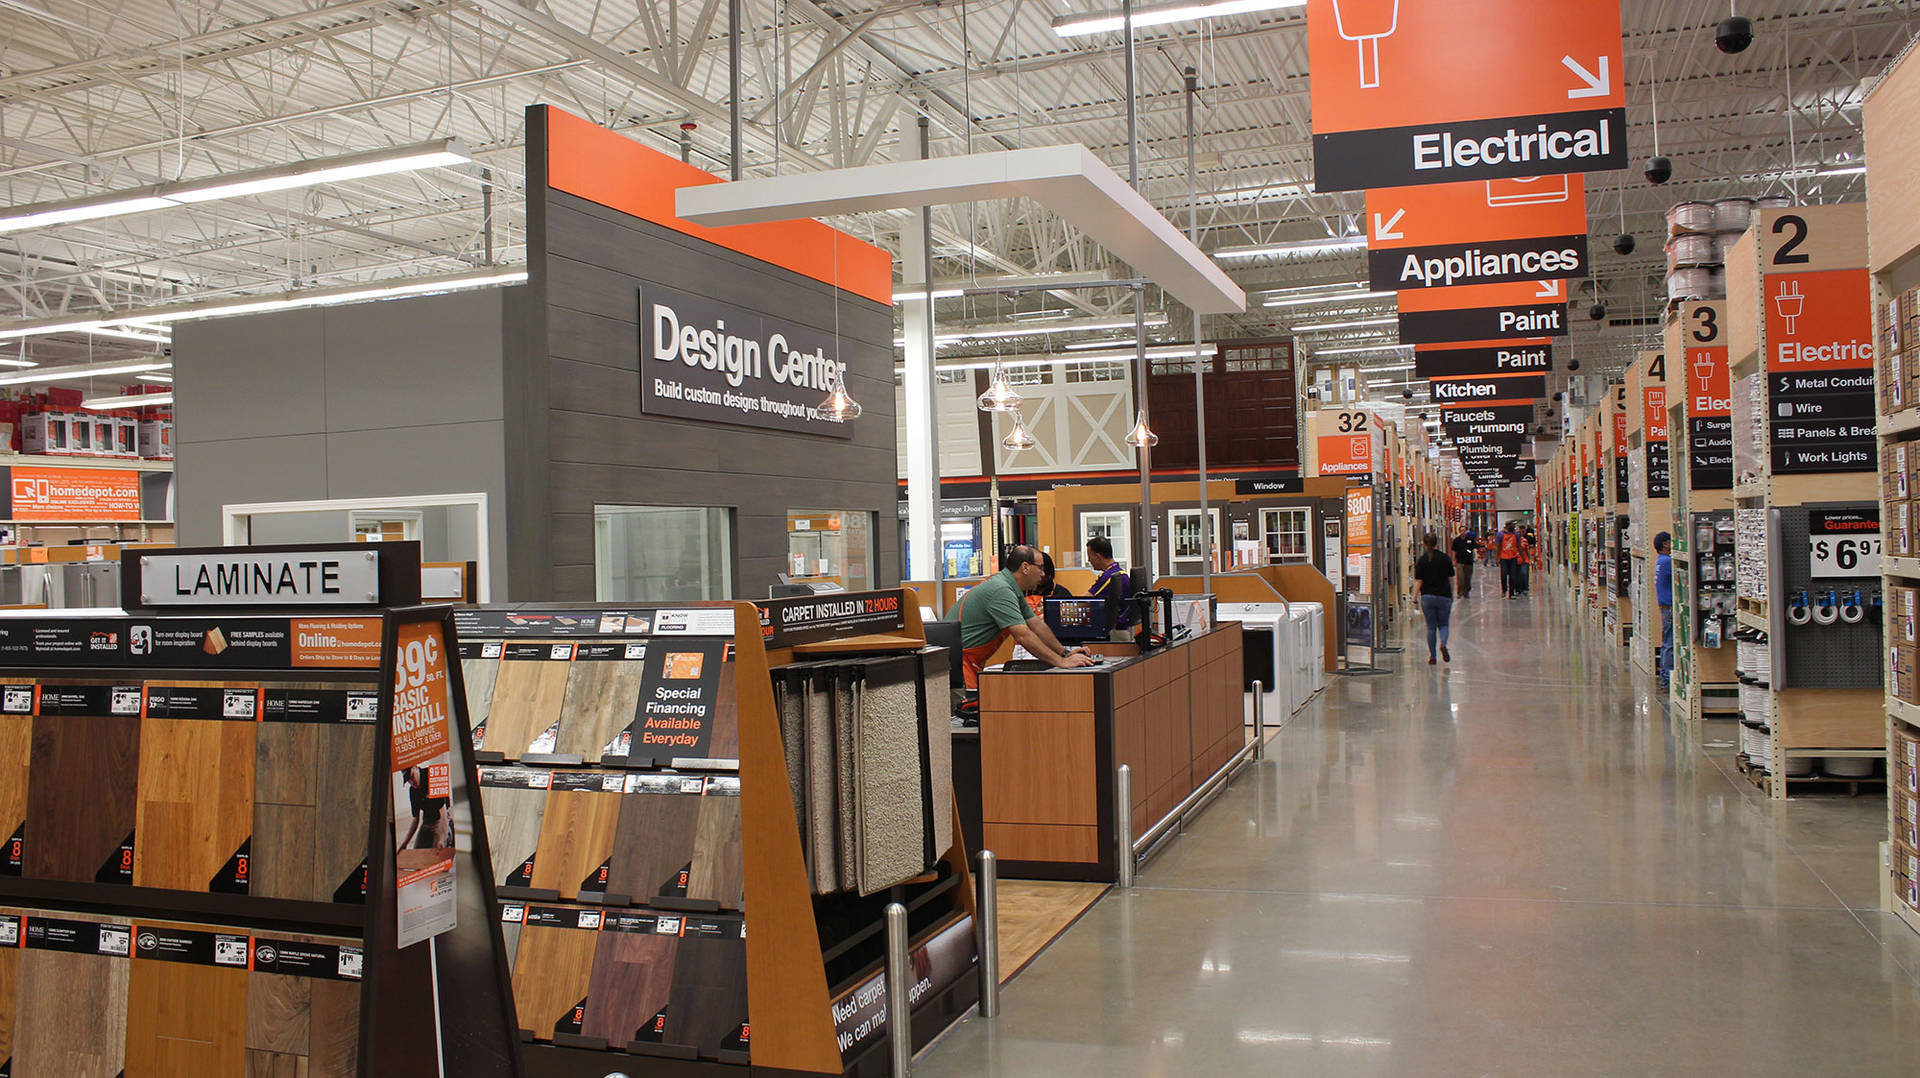 Home Depot's Design Center Showroom showcasing an array of home improvement products. Wallpaper